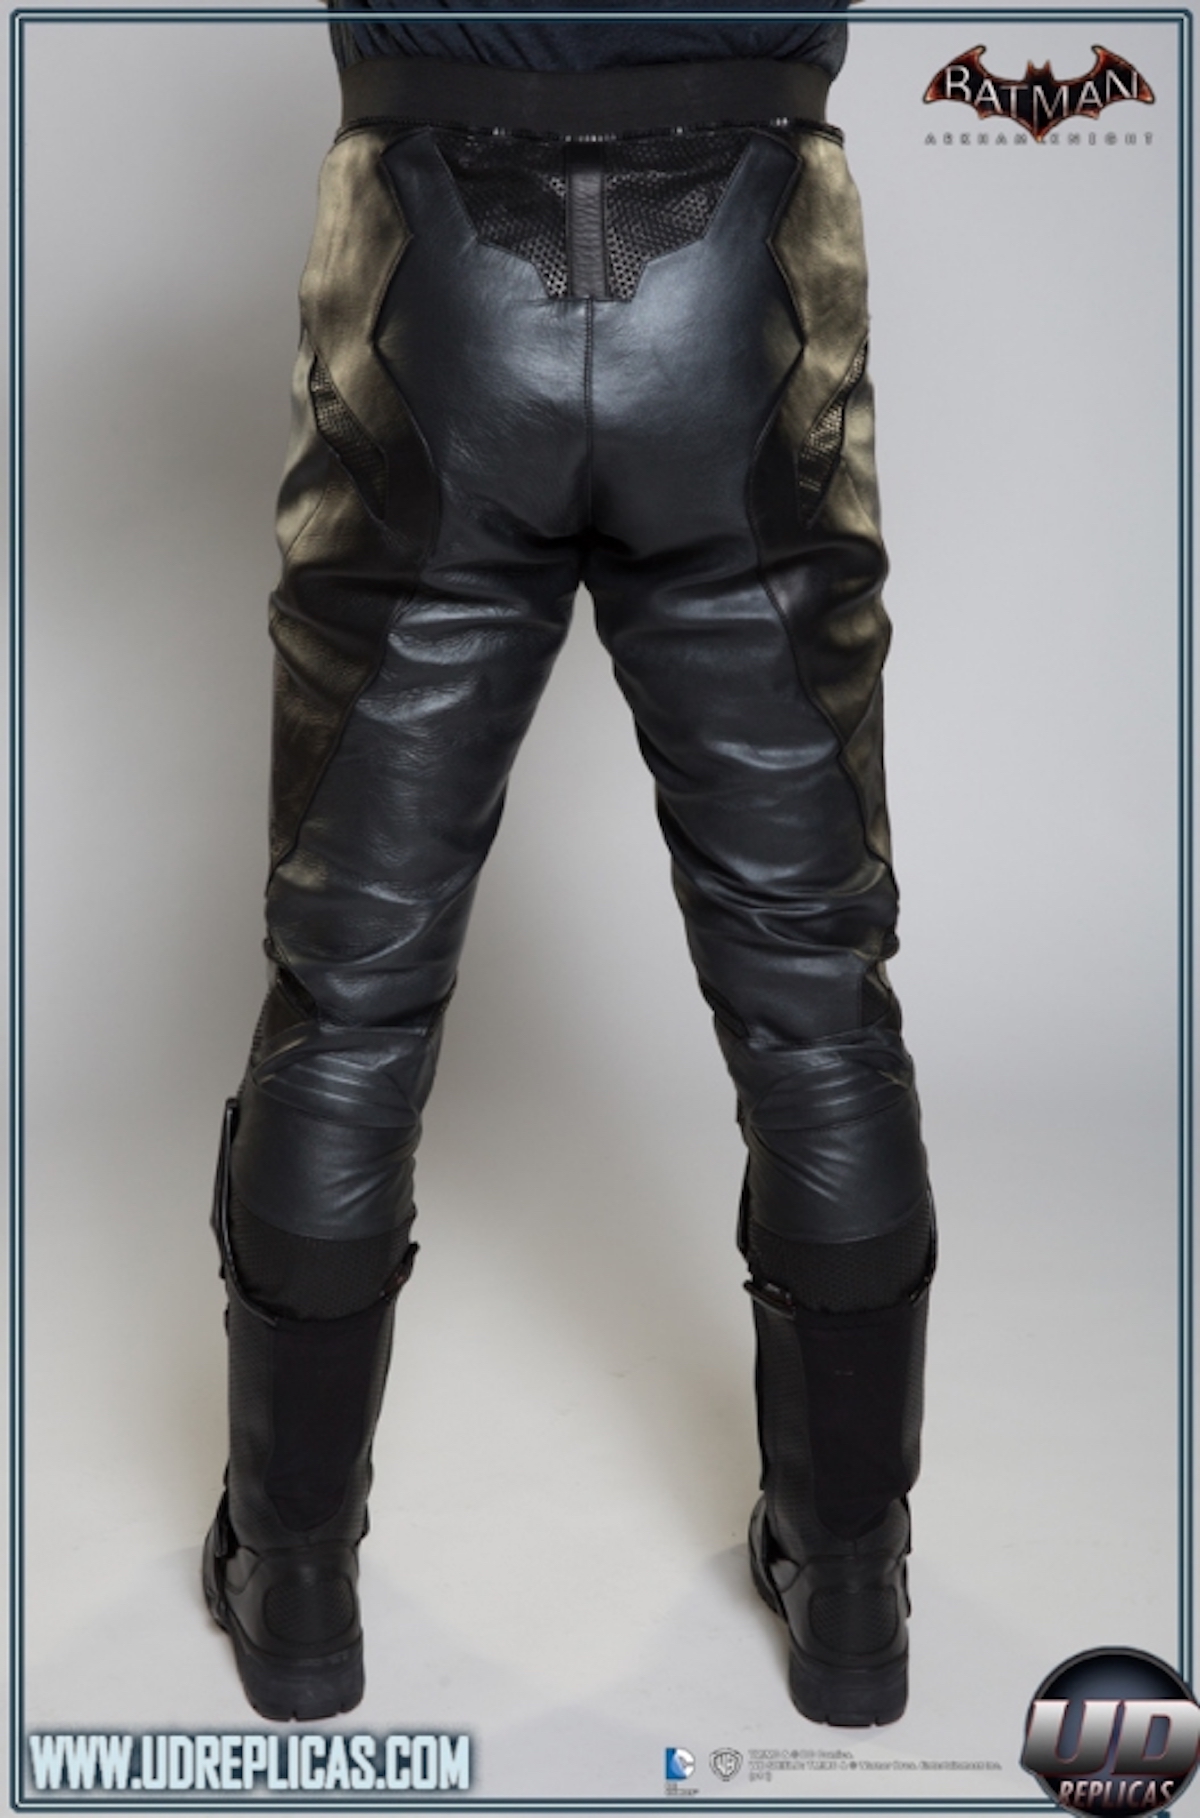 A close-up of the pants on the BATMAN™: Arkham Knight Leather Motorcycle Suit from UD Replicas